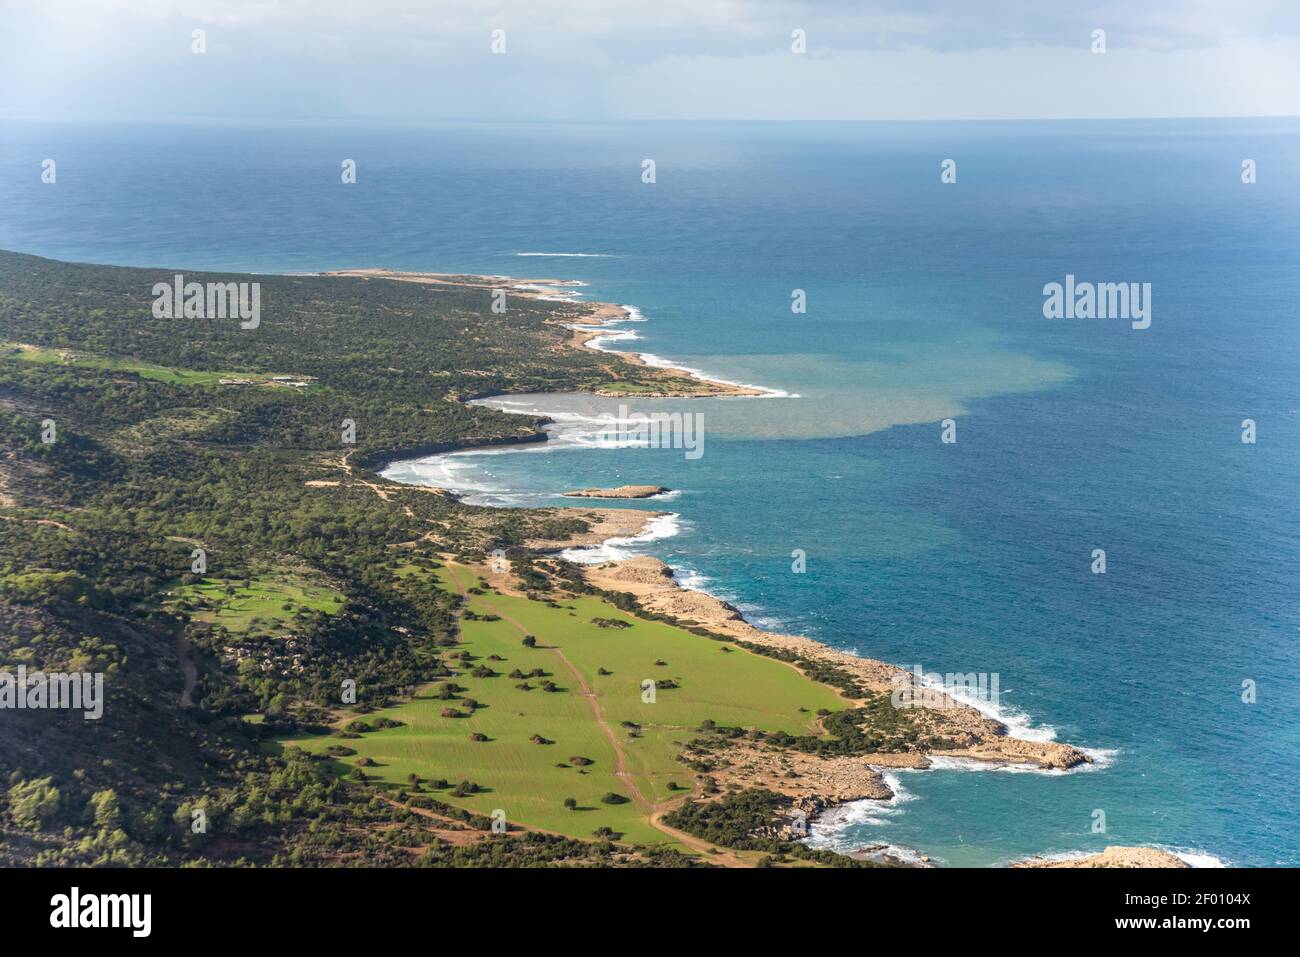 Landscape of Akamas Peninsula National Park, Cyprus. Tourist resort with beaches and blue lagoons Stock Photo